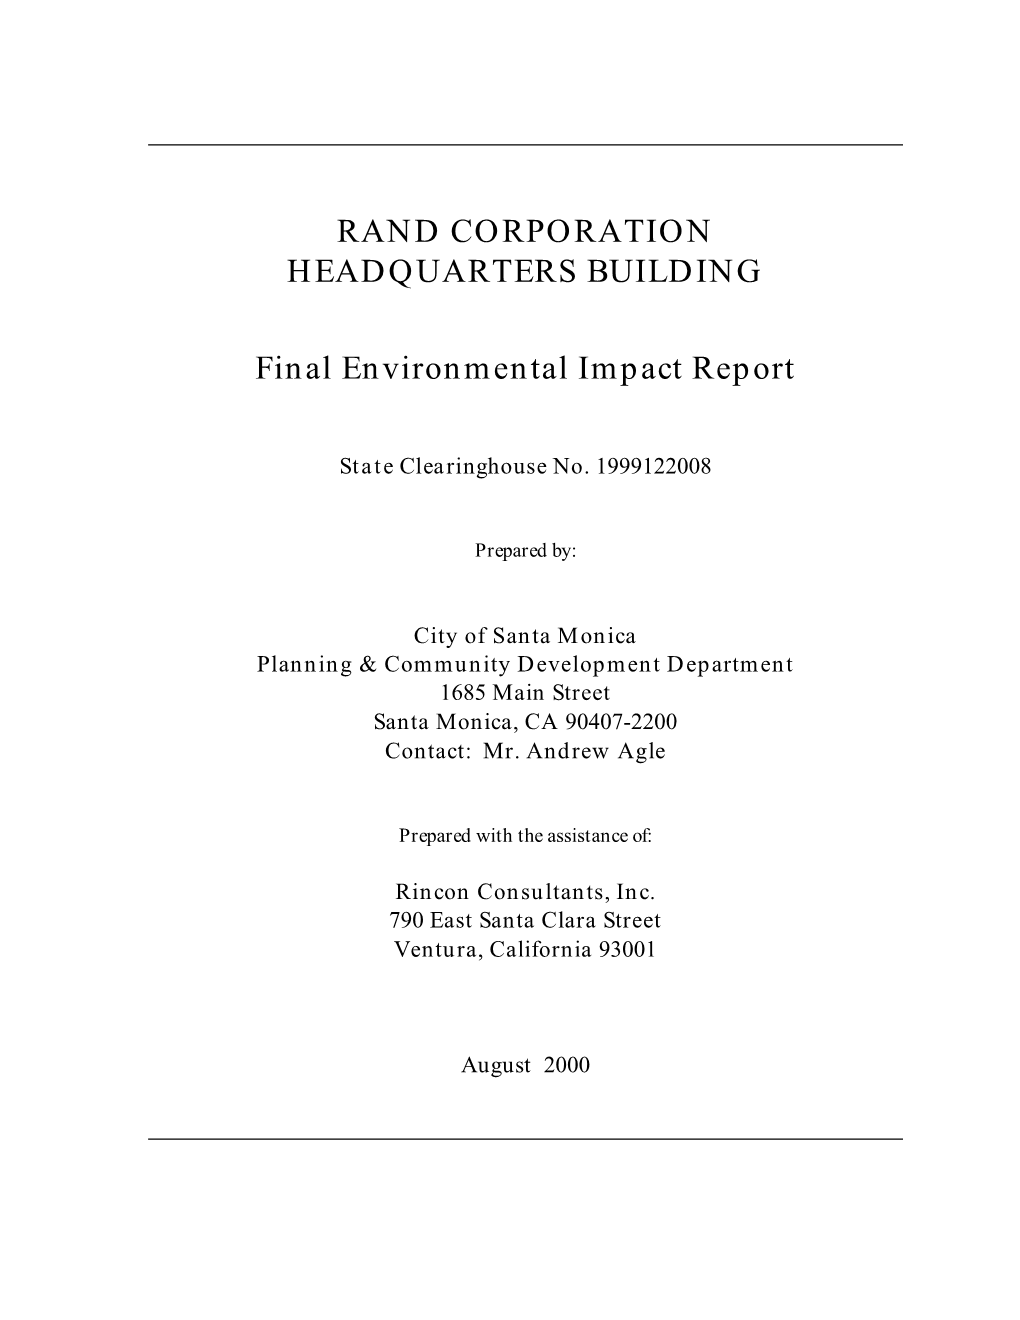 Rand Corporation Headquarters Building Final EIR Table of Contents